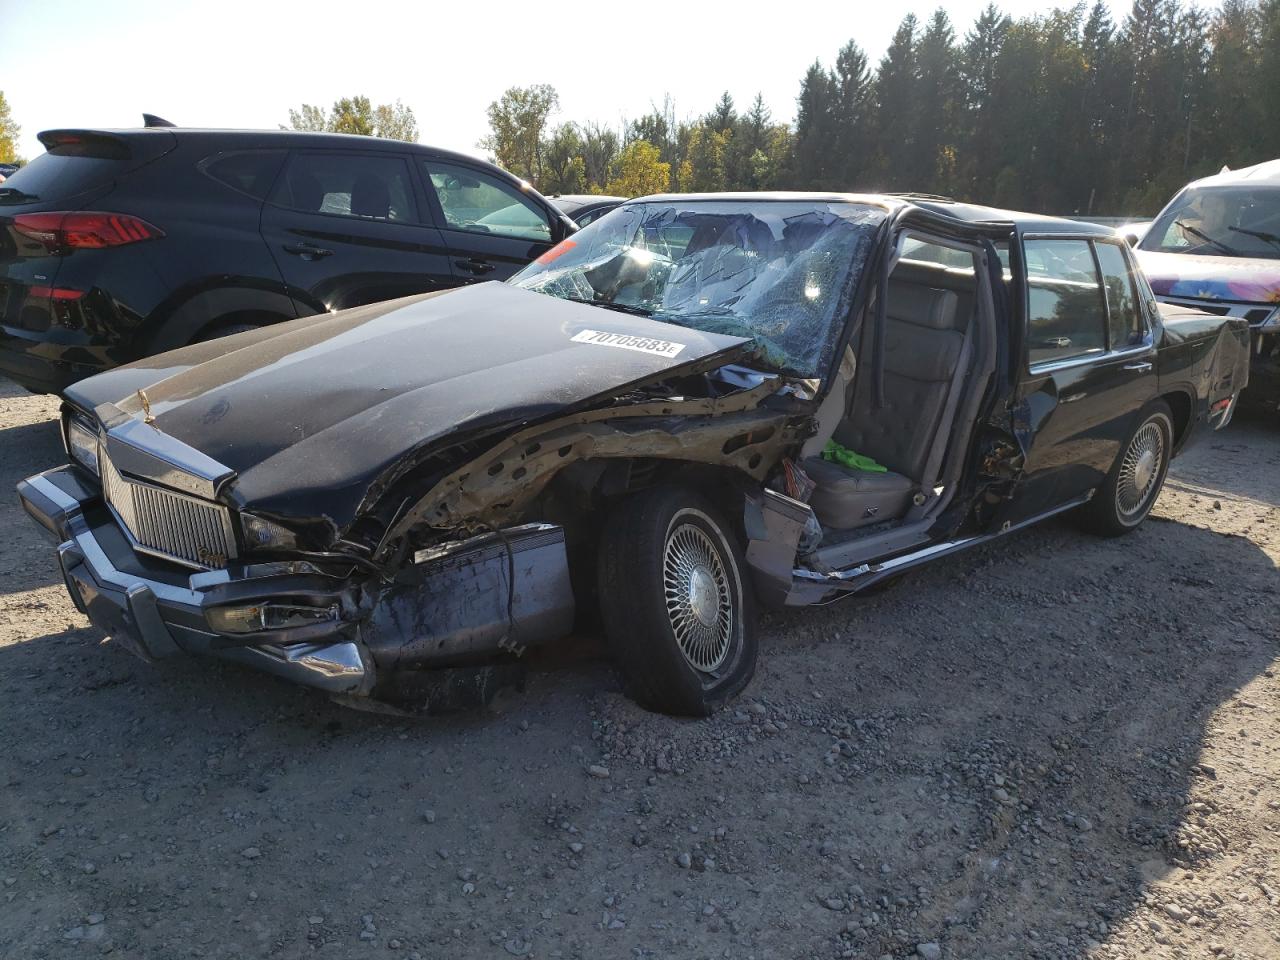 vin: 1G6CB5330L4293585 1G6CB5330L4293585 1990 cadillac fleetwood 4500 for Sale in 14482 1366, Ny - Rochester, Leroy, USA